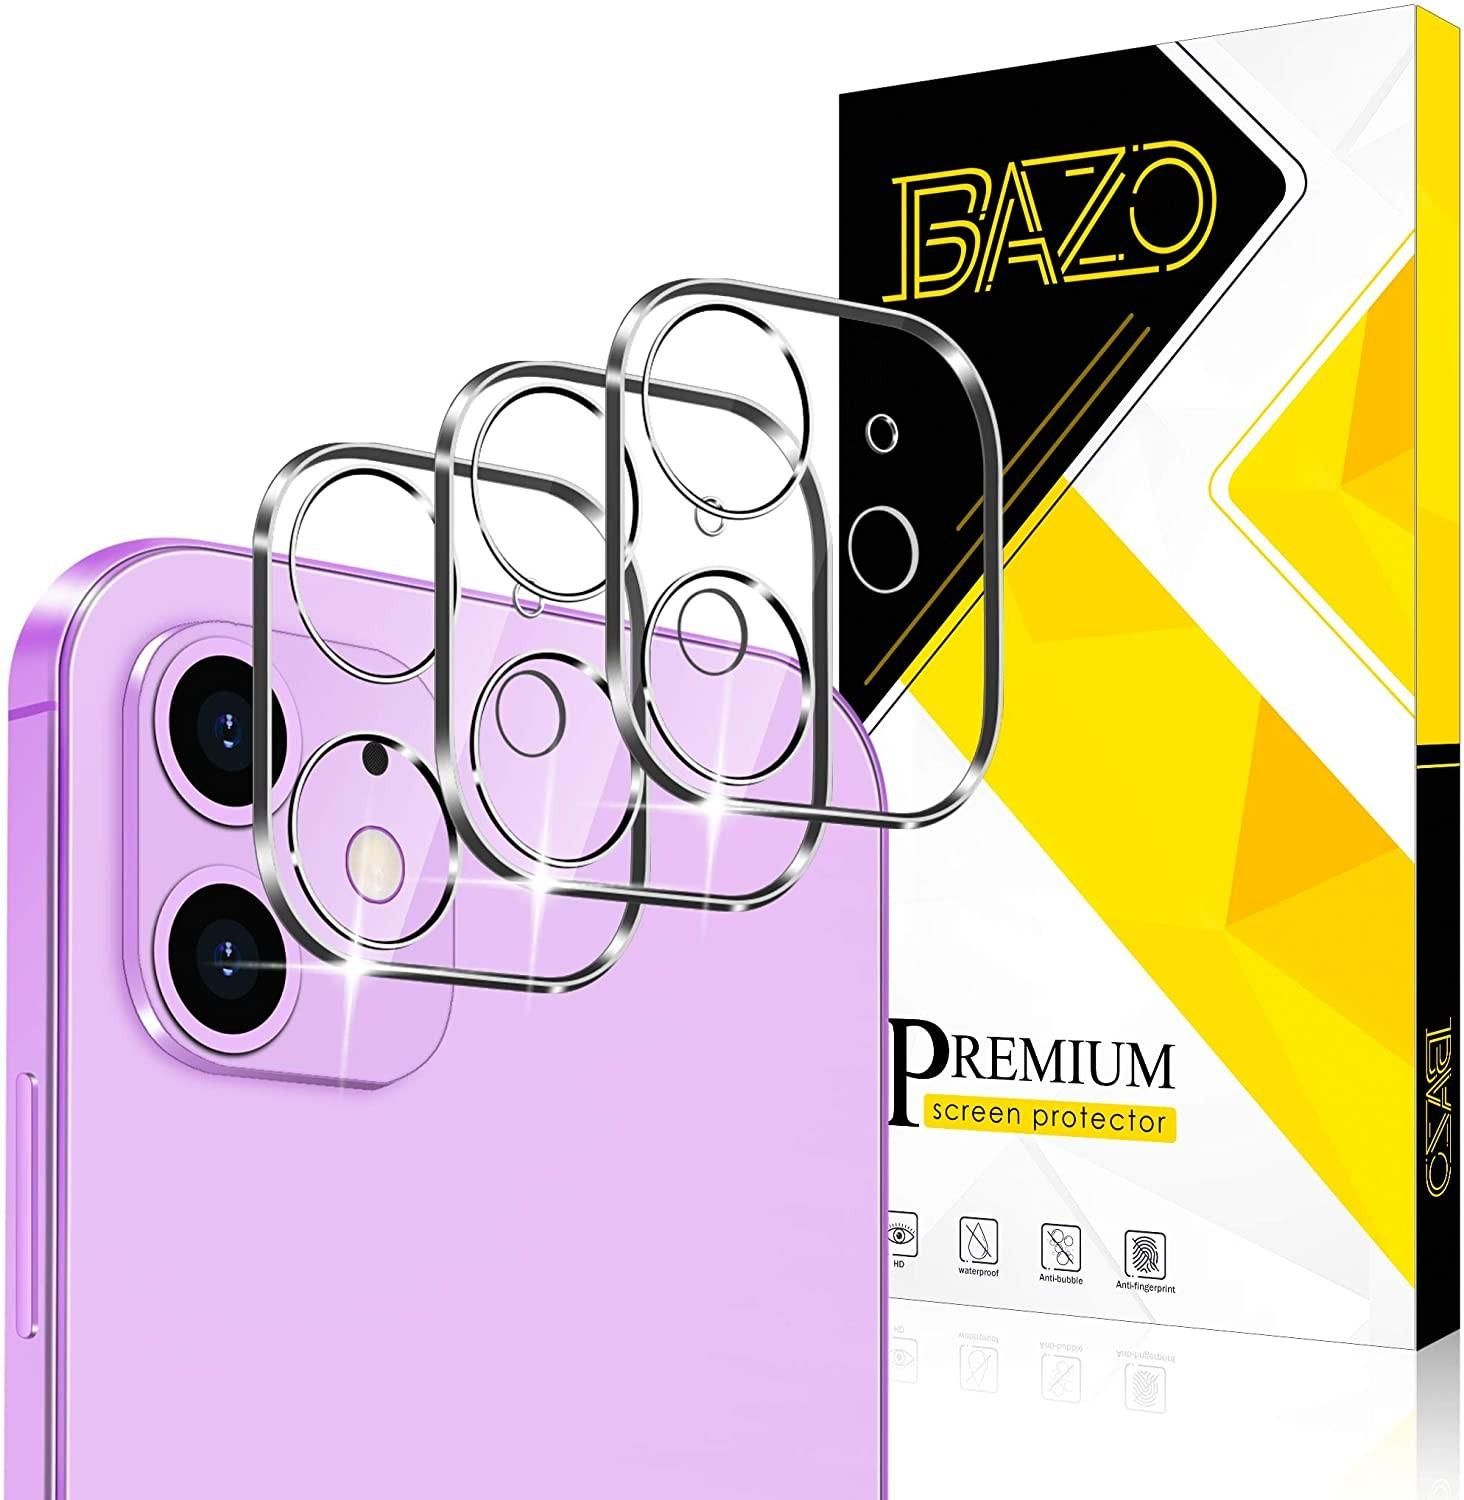 Bazo camera lens protector for iPhone 12